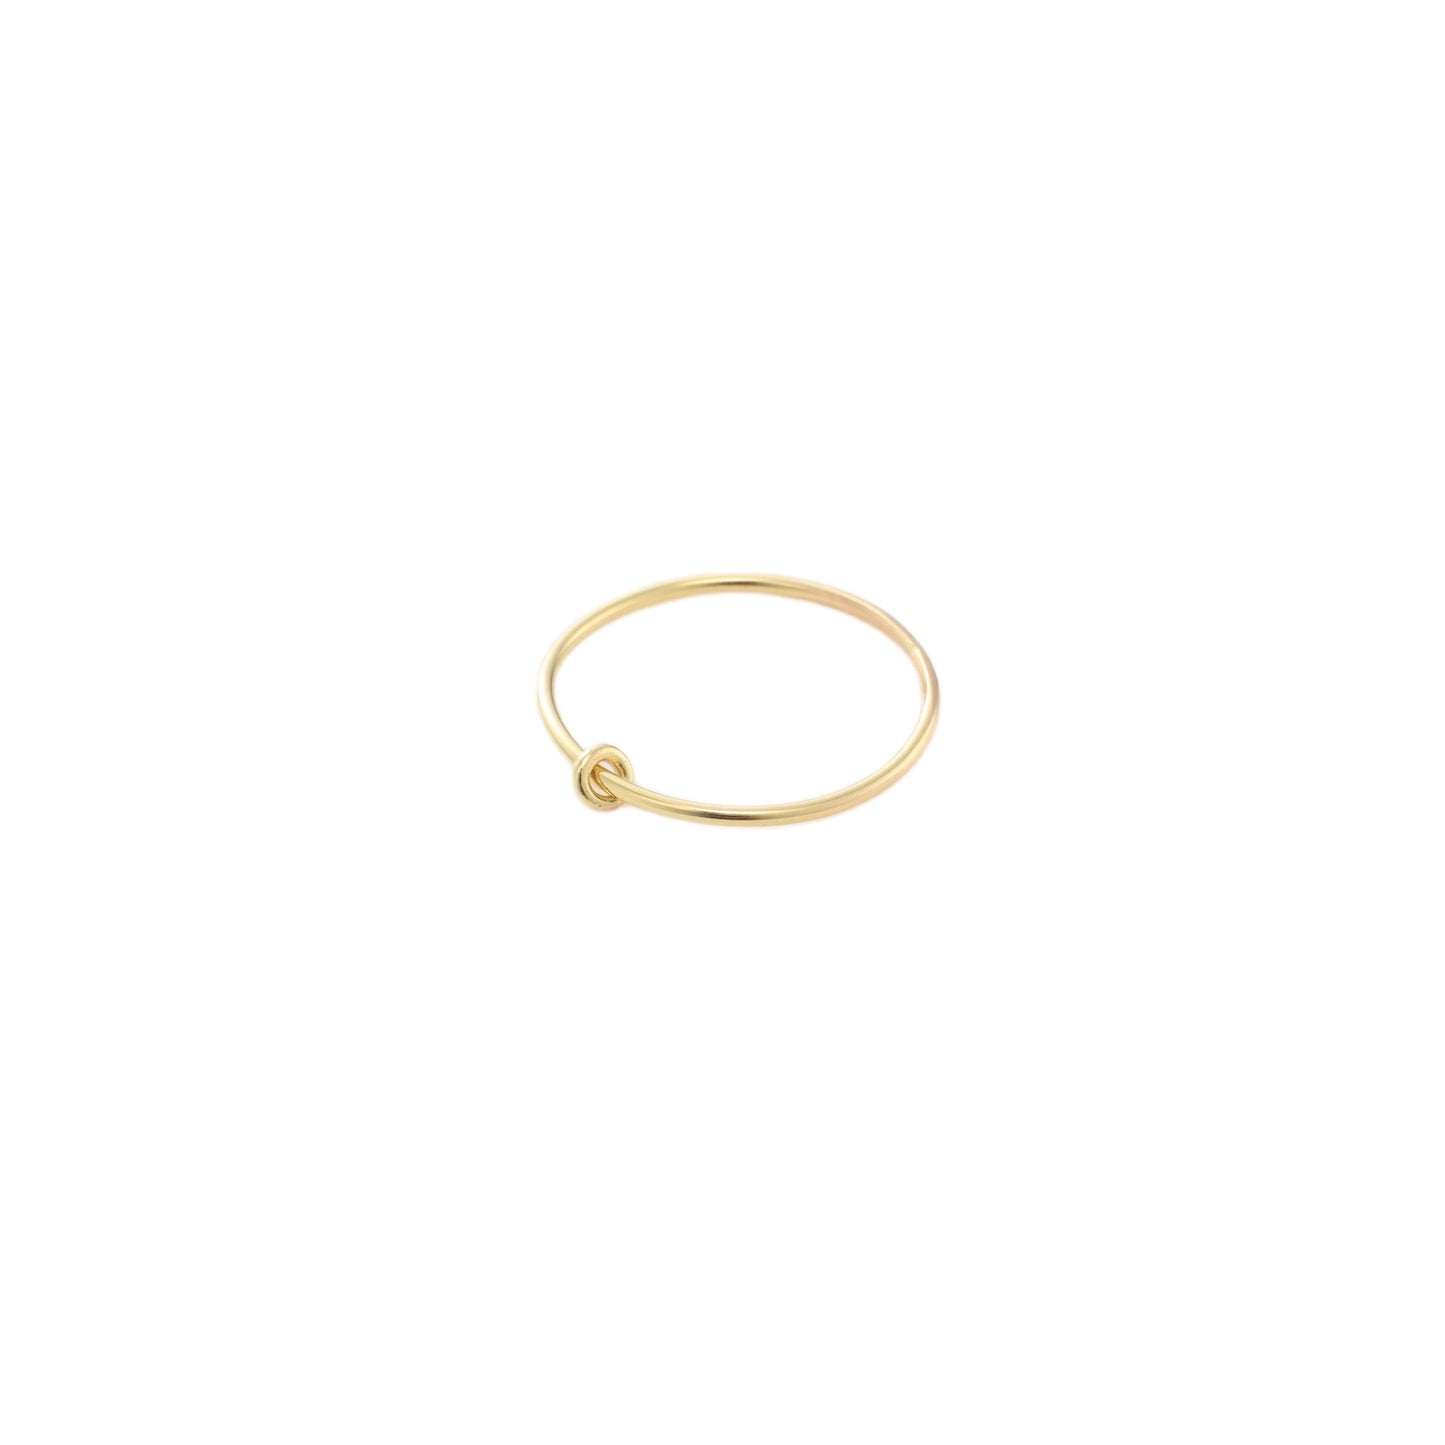 SPECIAL PRICE 【Aurore de Heusch】リング Ring Moments Doux gold